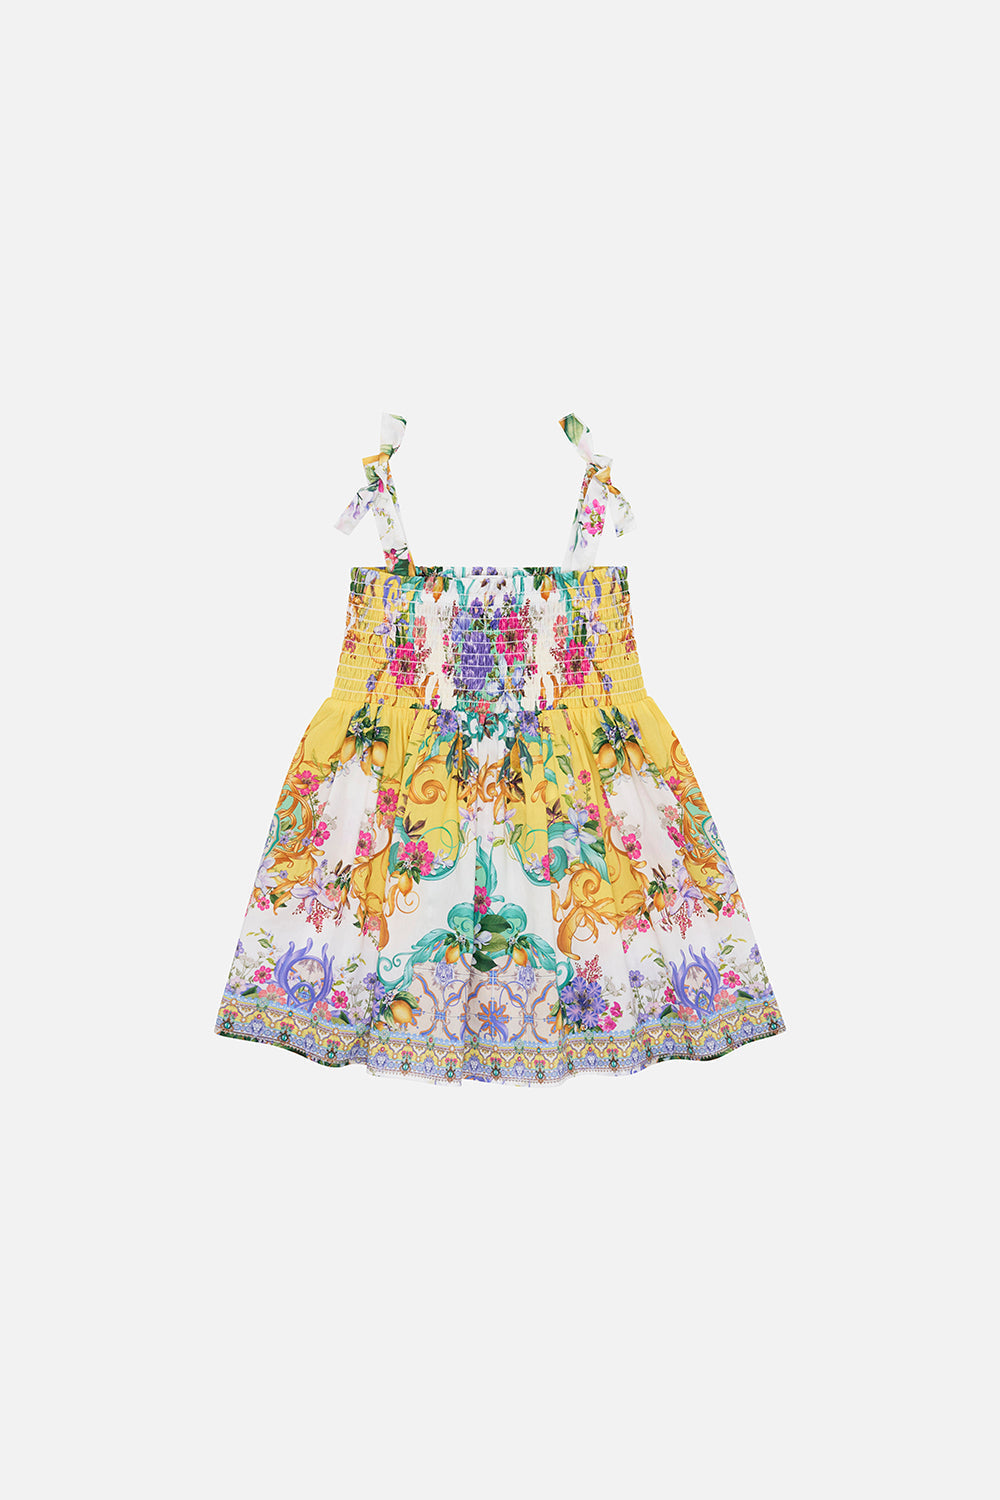 Product view of MILLA BY CAMILLA babies dress in Caterina Spritz print